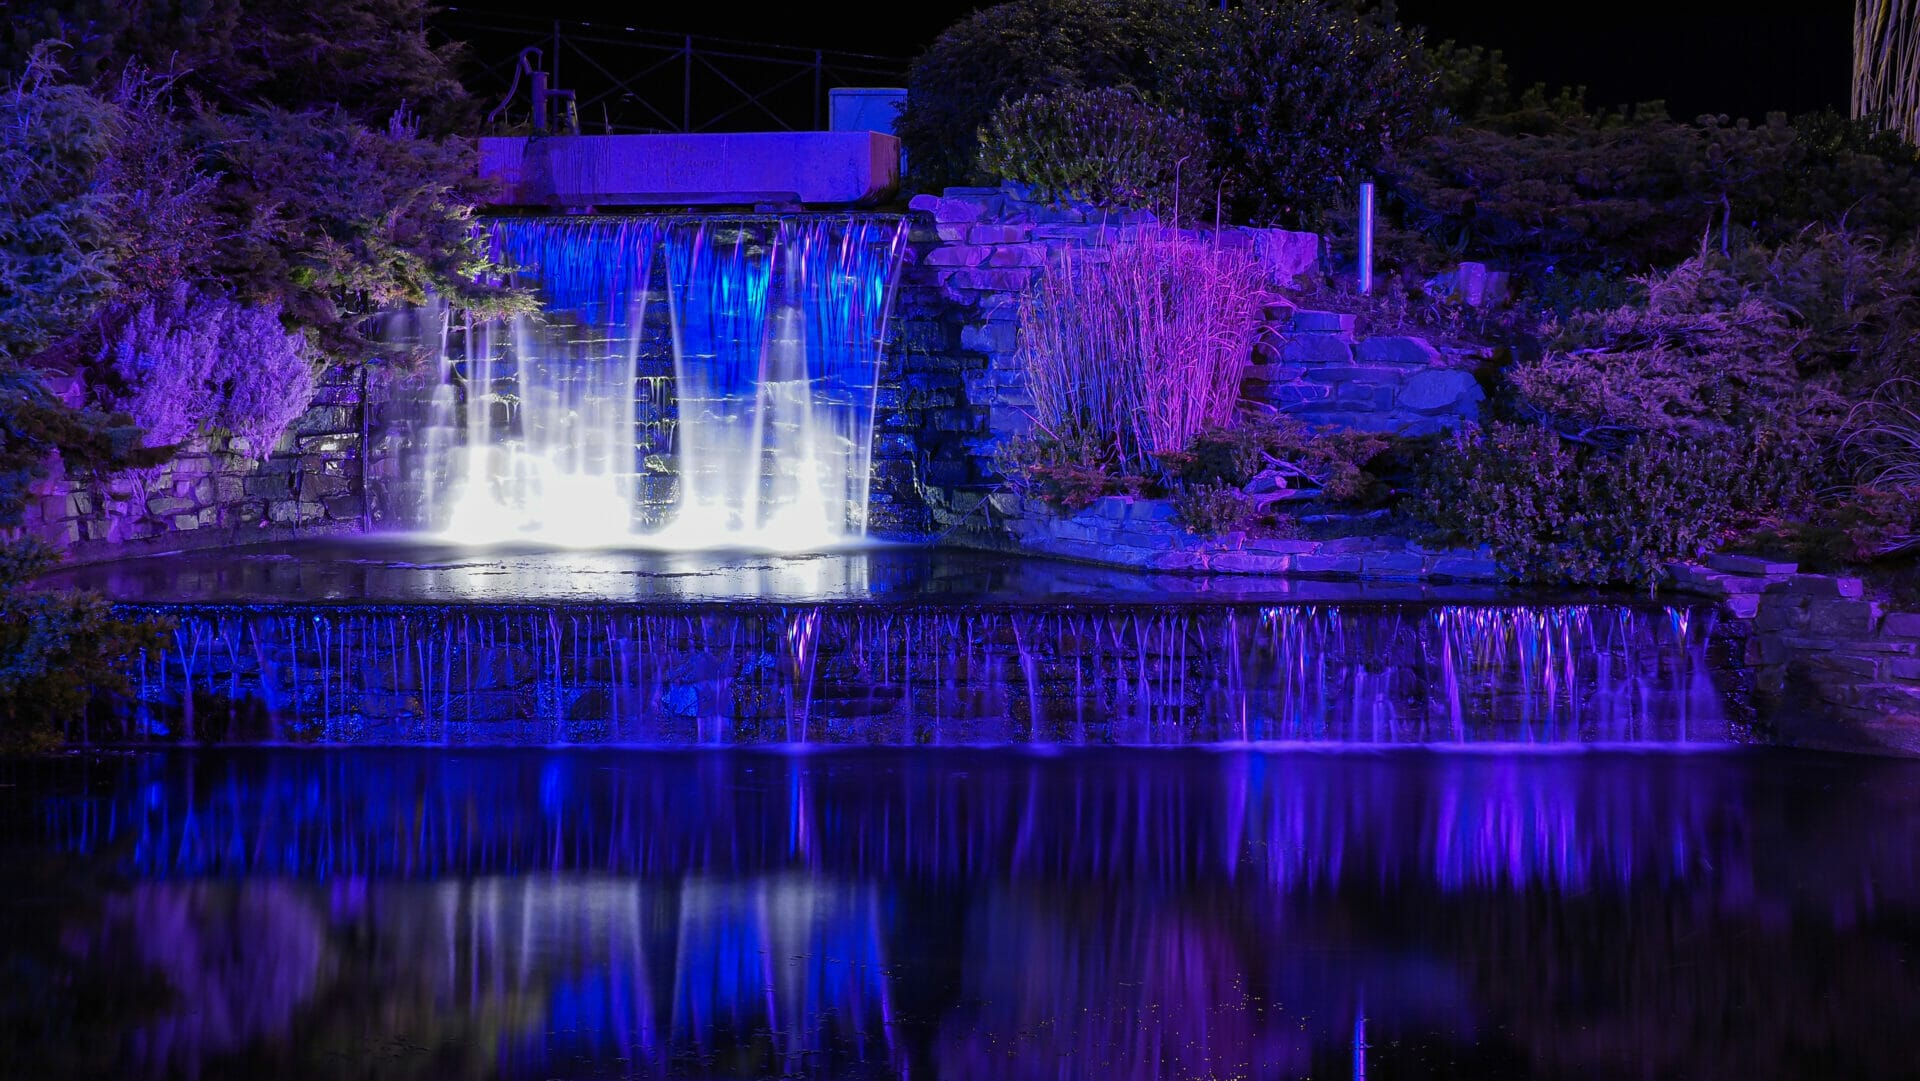 Photo of a man-made water feature in Rhyl, Norht Wales - shot at night in low-light with the coloured lights displaying